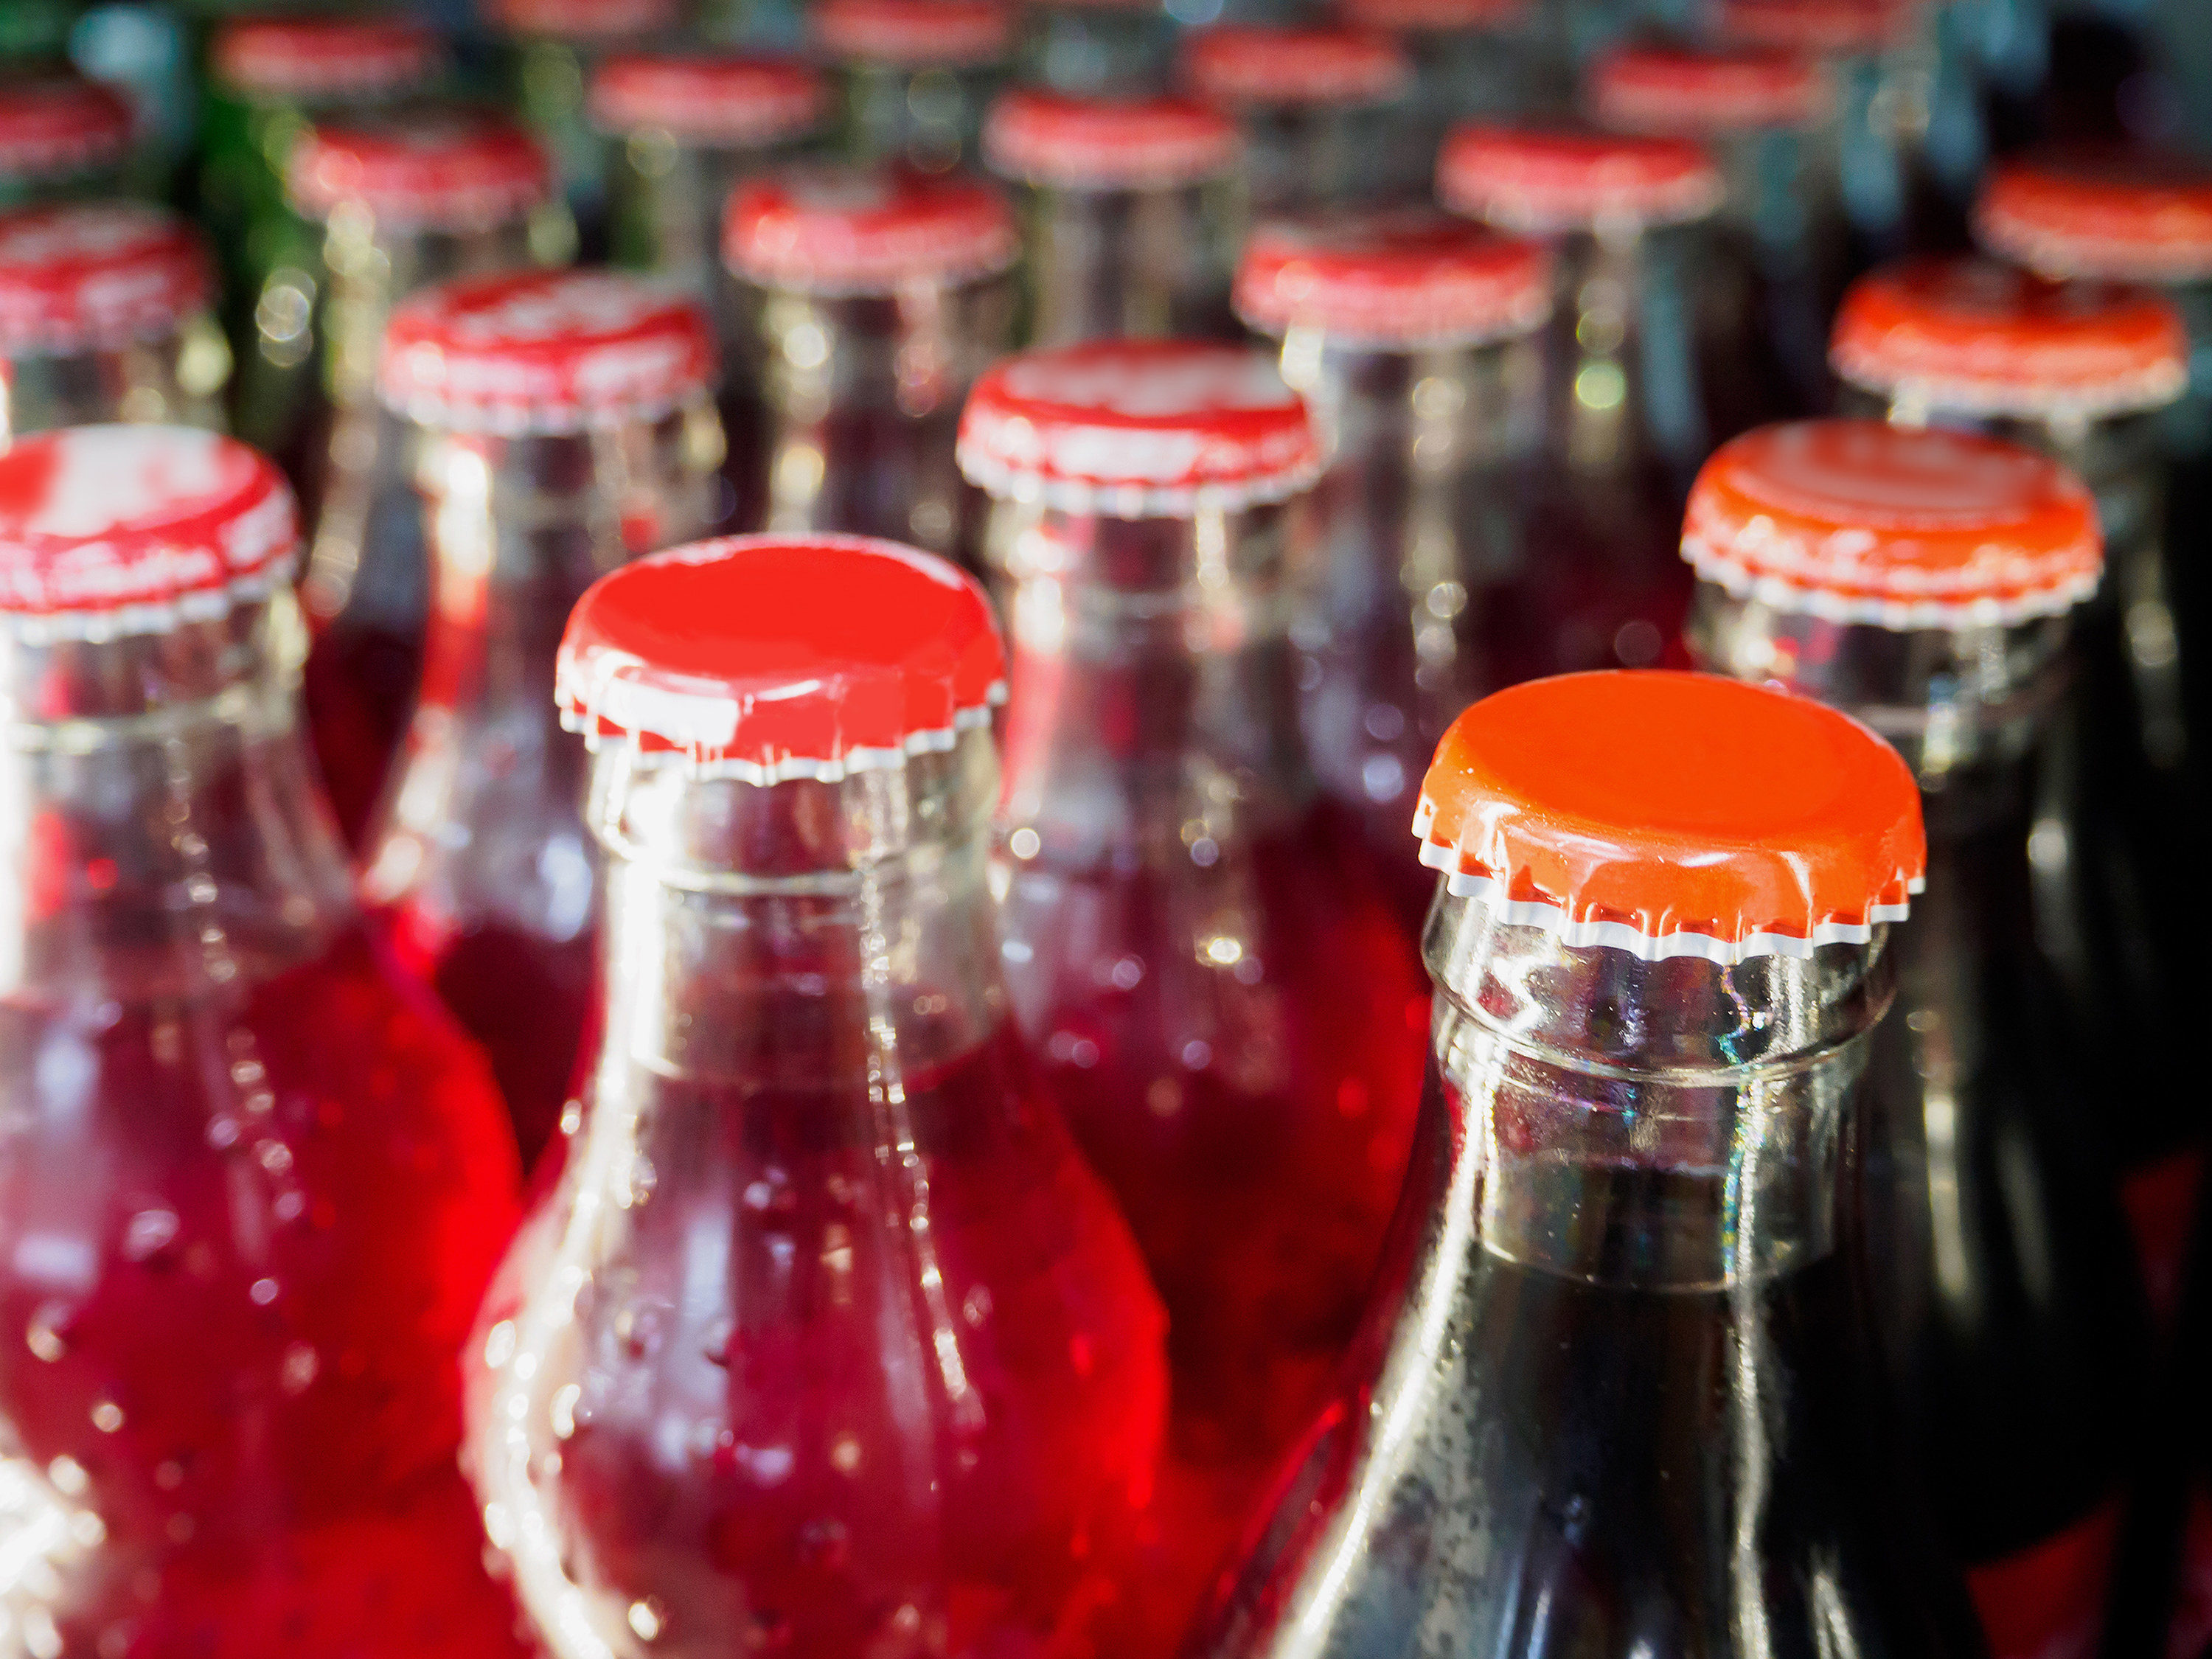 Rows of glass bottles filled with soda are pictured